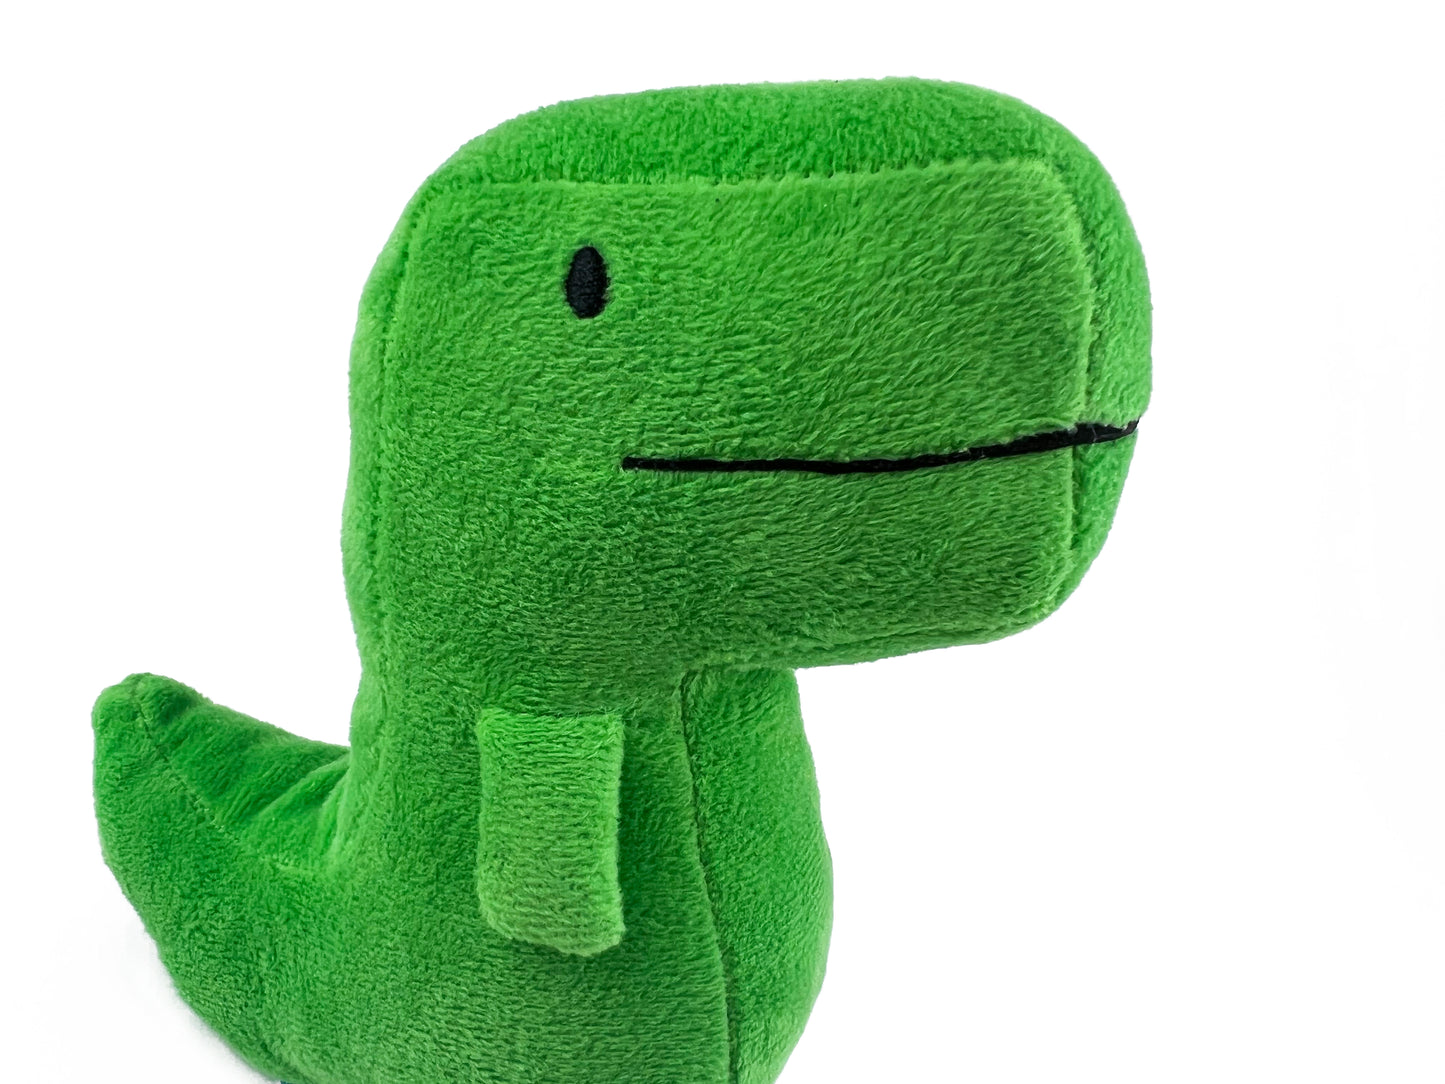 Timmy T-Rex Plush Toy (NEW 2022 Edition!)